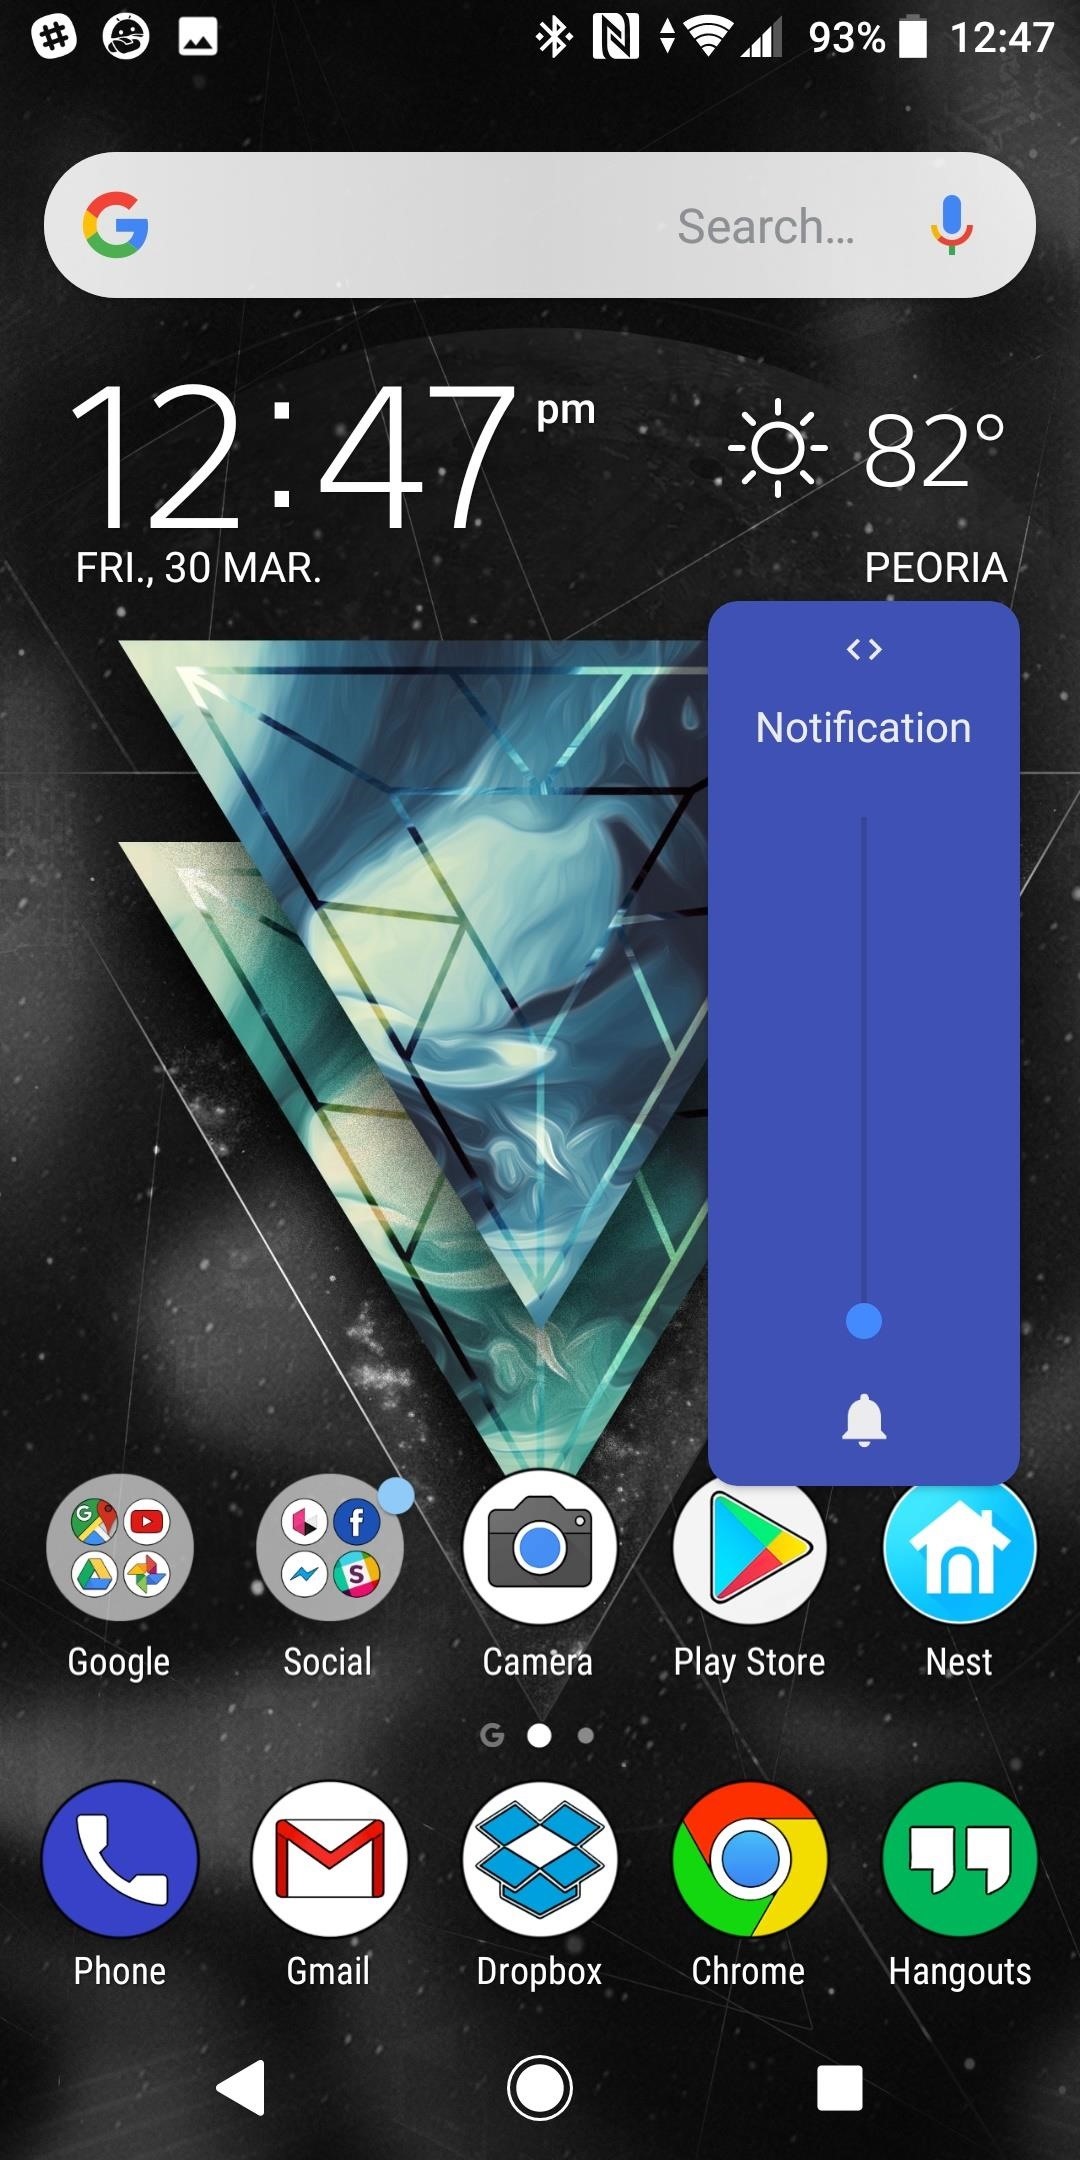 Get Android 9.0 Pie's Volume Slider on Any Phone & Control Media Volume by Default